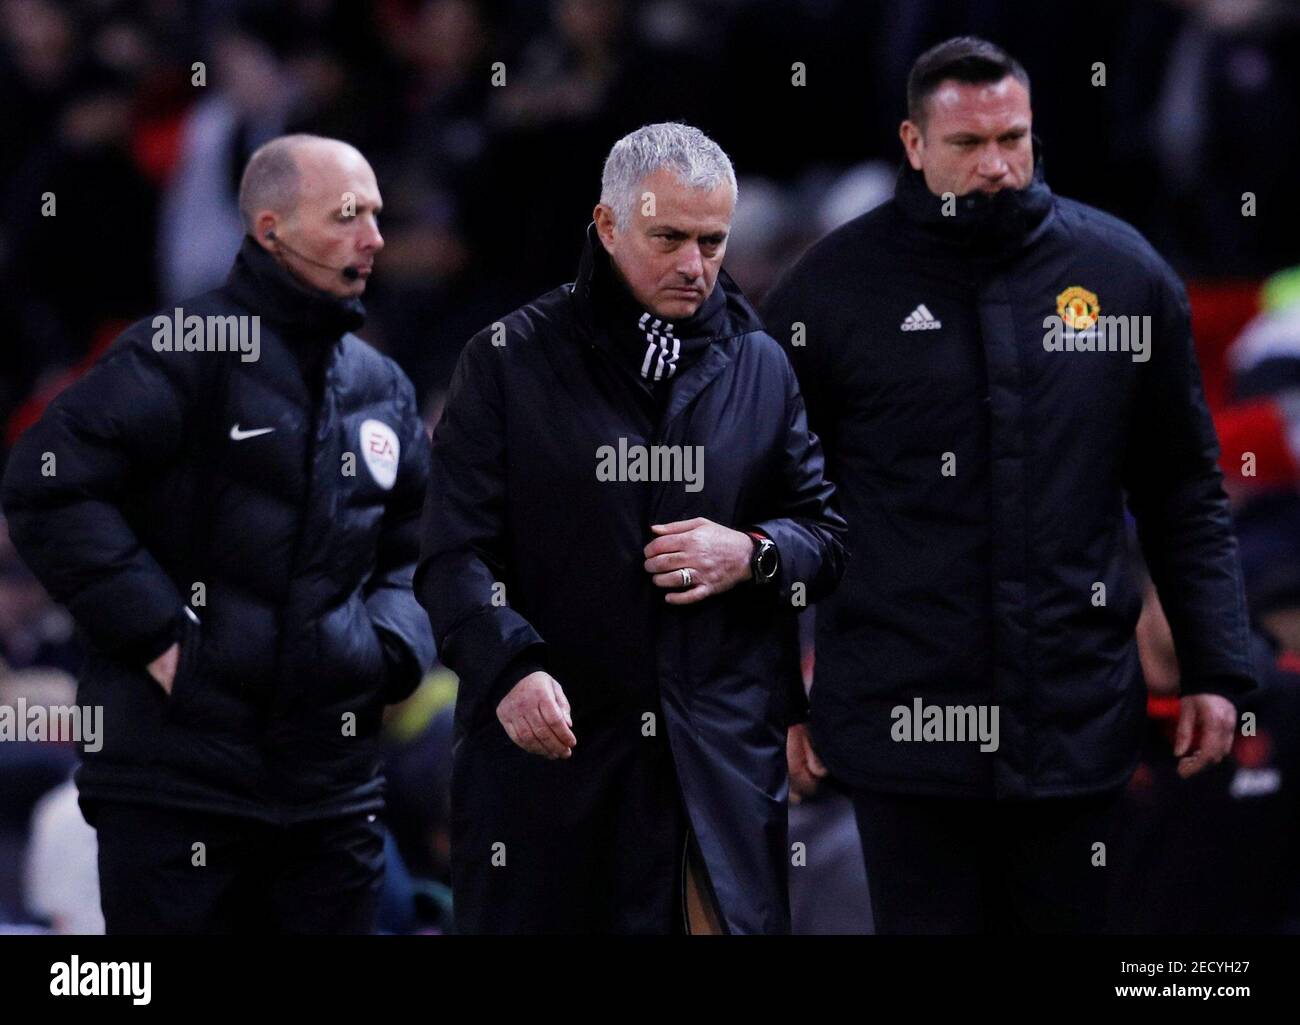 Soccer Football - Premier League - Manchester United v Fulham - Old Trafford, Manchester, Britain - December 8, 2018  Manchester United manager Jose Mourinho after the match     REUTERS/Phil Noble   EDITORIAL USE ONLY. No use with unauthorized audio, video, data, fixture lists, club/league logos or 'live' services. Online in-match use limited to 75 images, no video emulation. No use in betting, games or single club/league/player publications.  Please contact your account representative for further details. Stock Photo